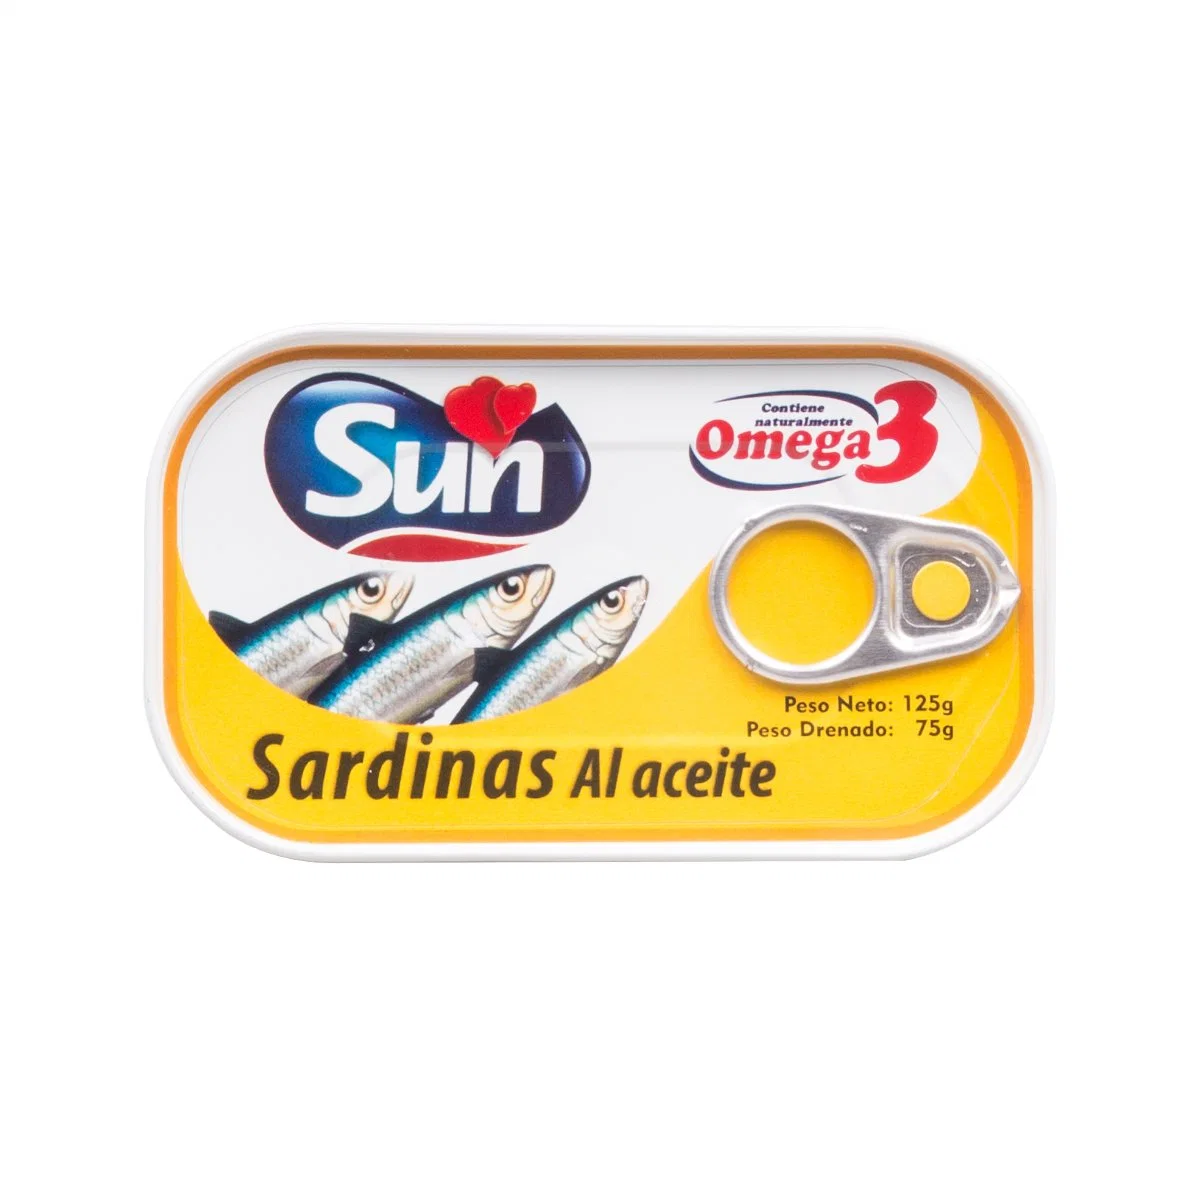 Cheap Canned Sardine Price in Vegetable Oil 125gx50tins